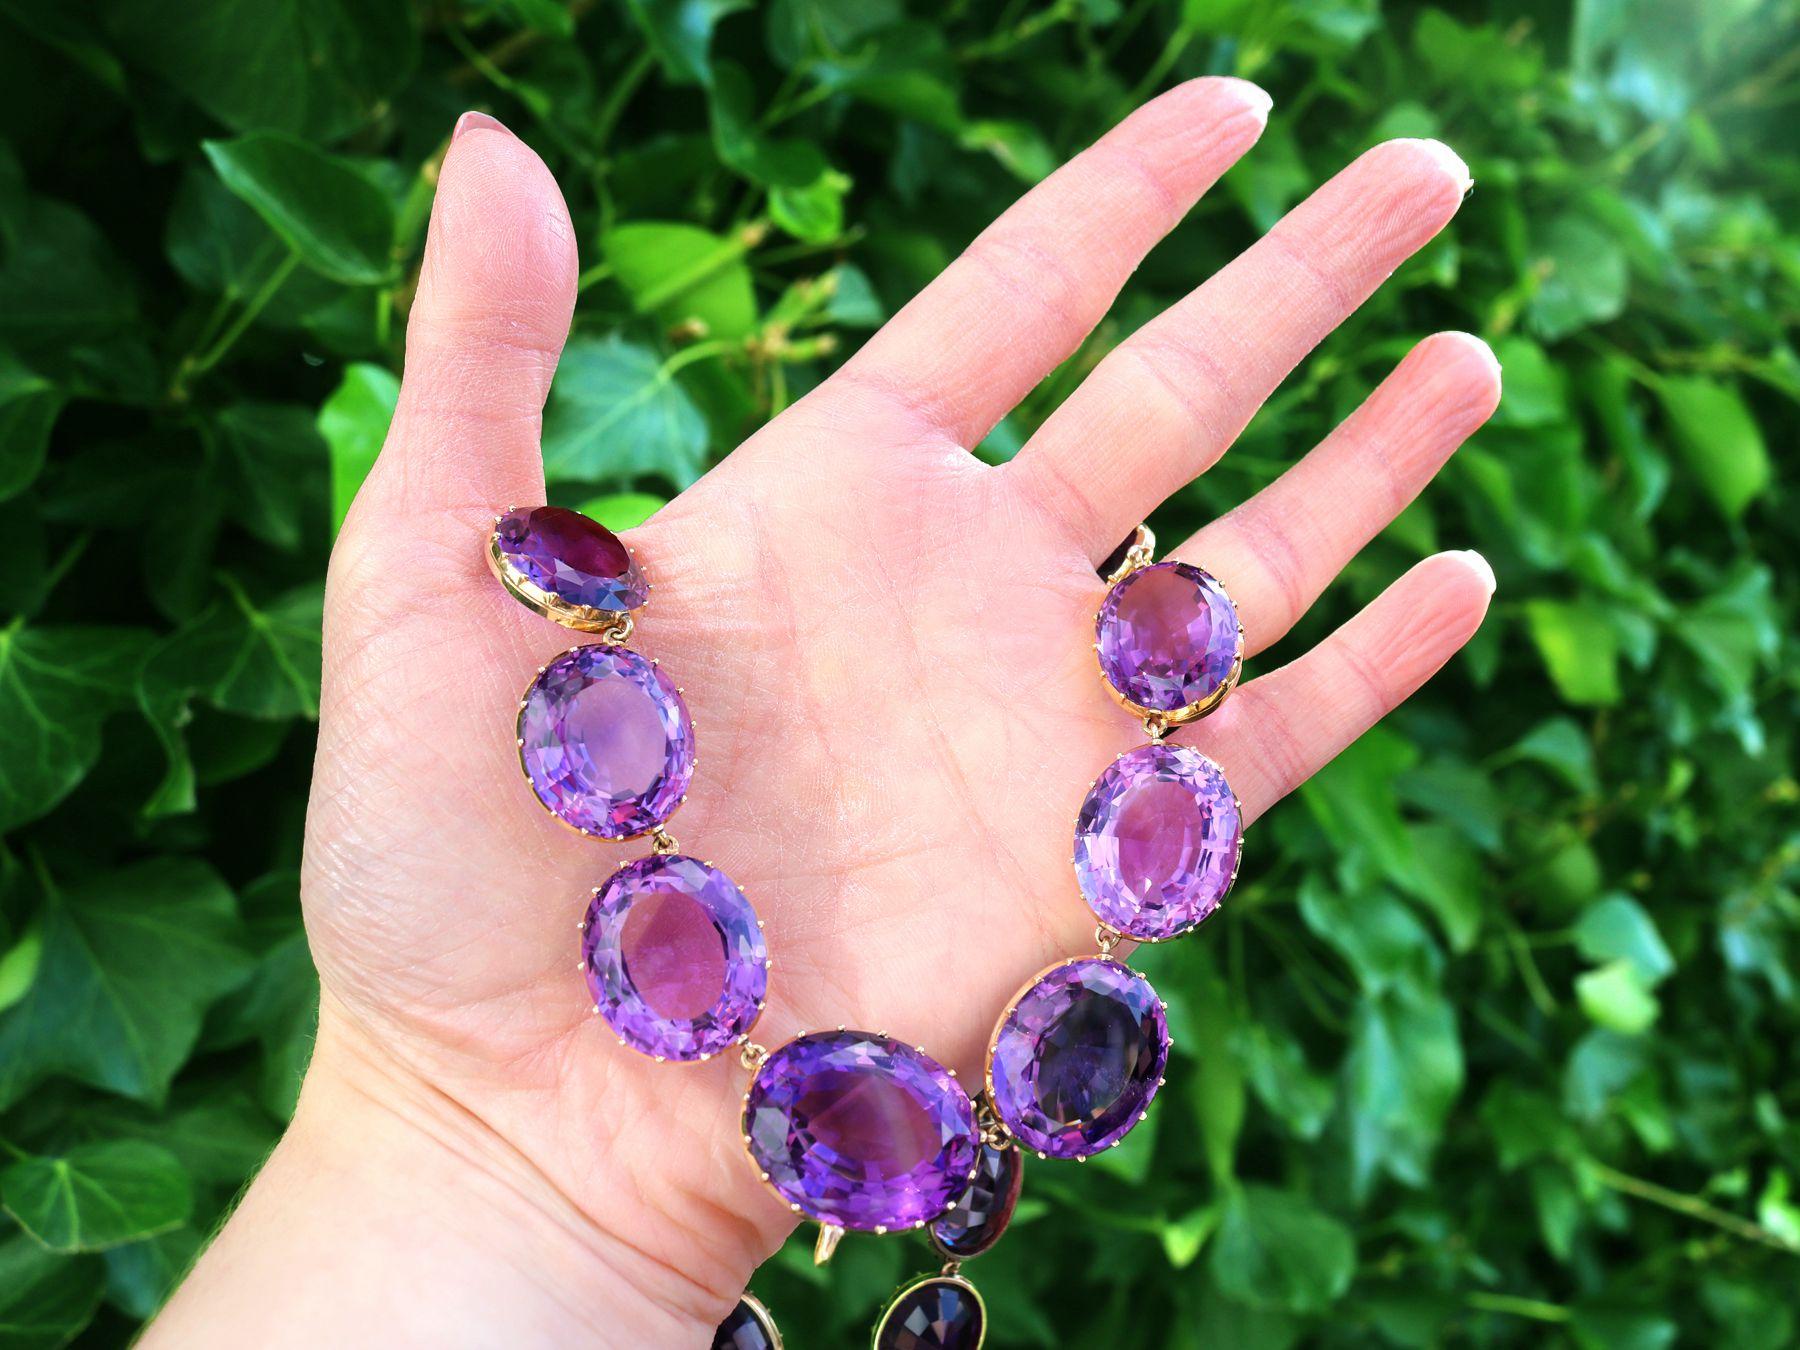 A stunning, fine and impressive antique Victorian 396.09 carat amethyst and 14 karat yellow gold riviere collarette necklace; part of our diverse antique jewelry collections.

This stunning antique amethyst necklace has been crafted in 14k yellow